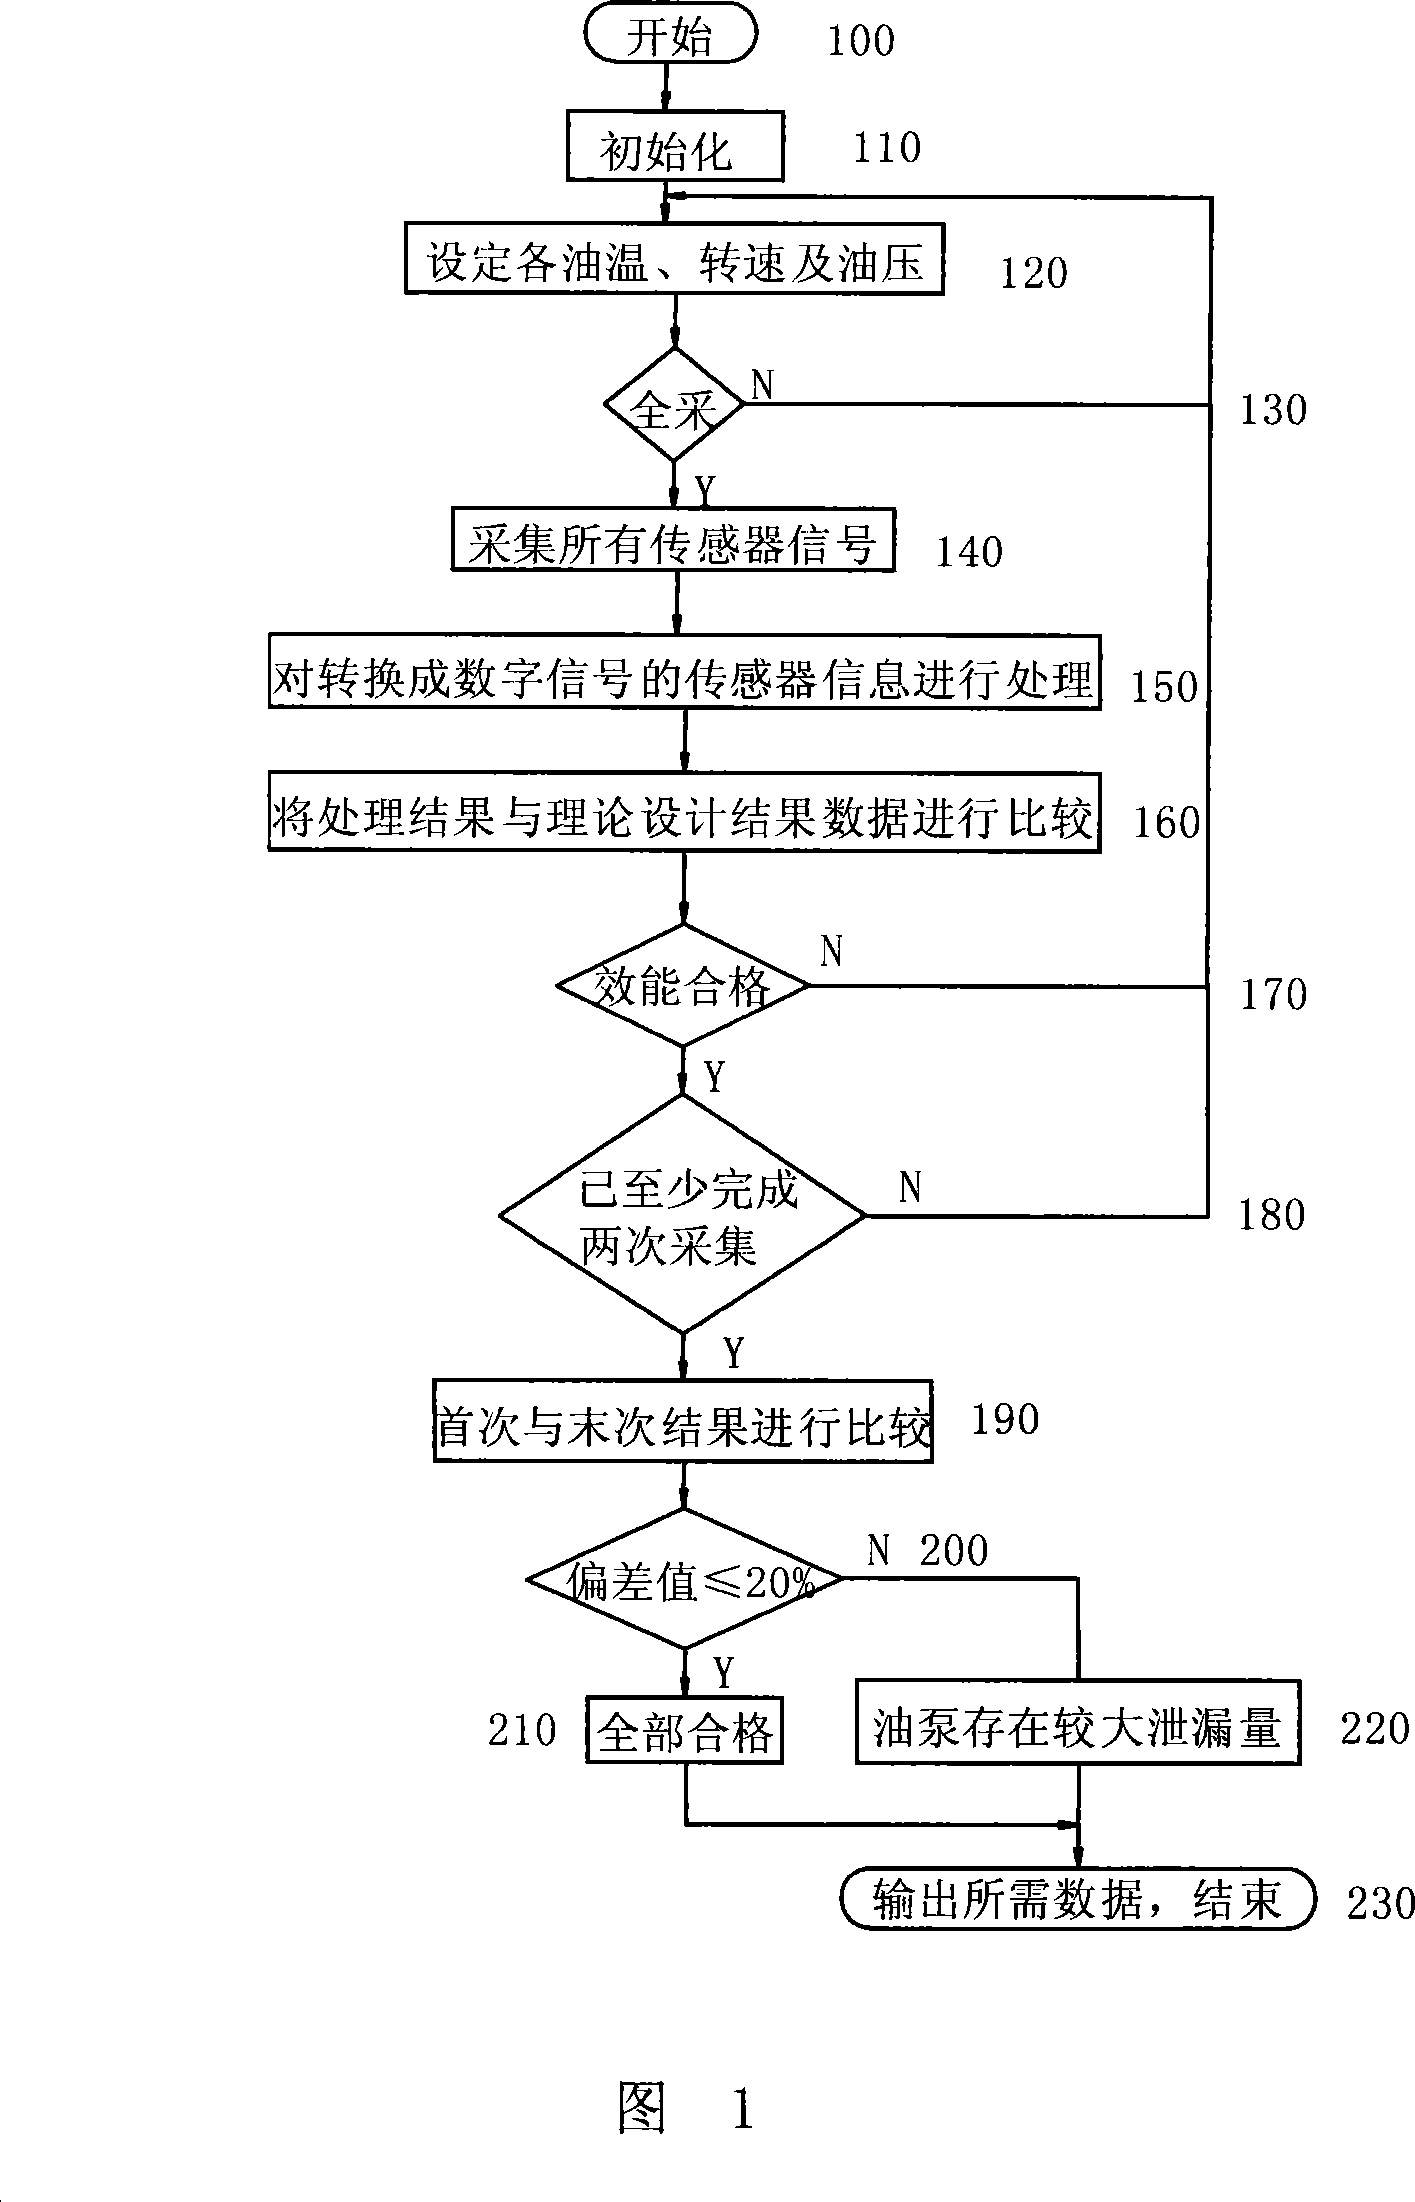 Method of testing self-changing gearbox oil pump assembly